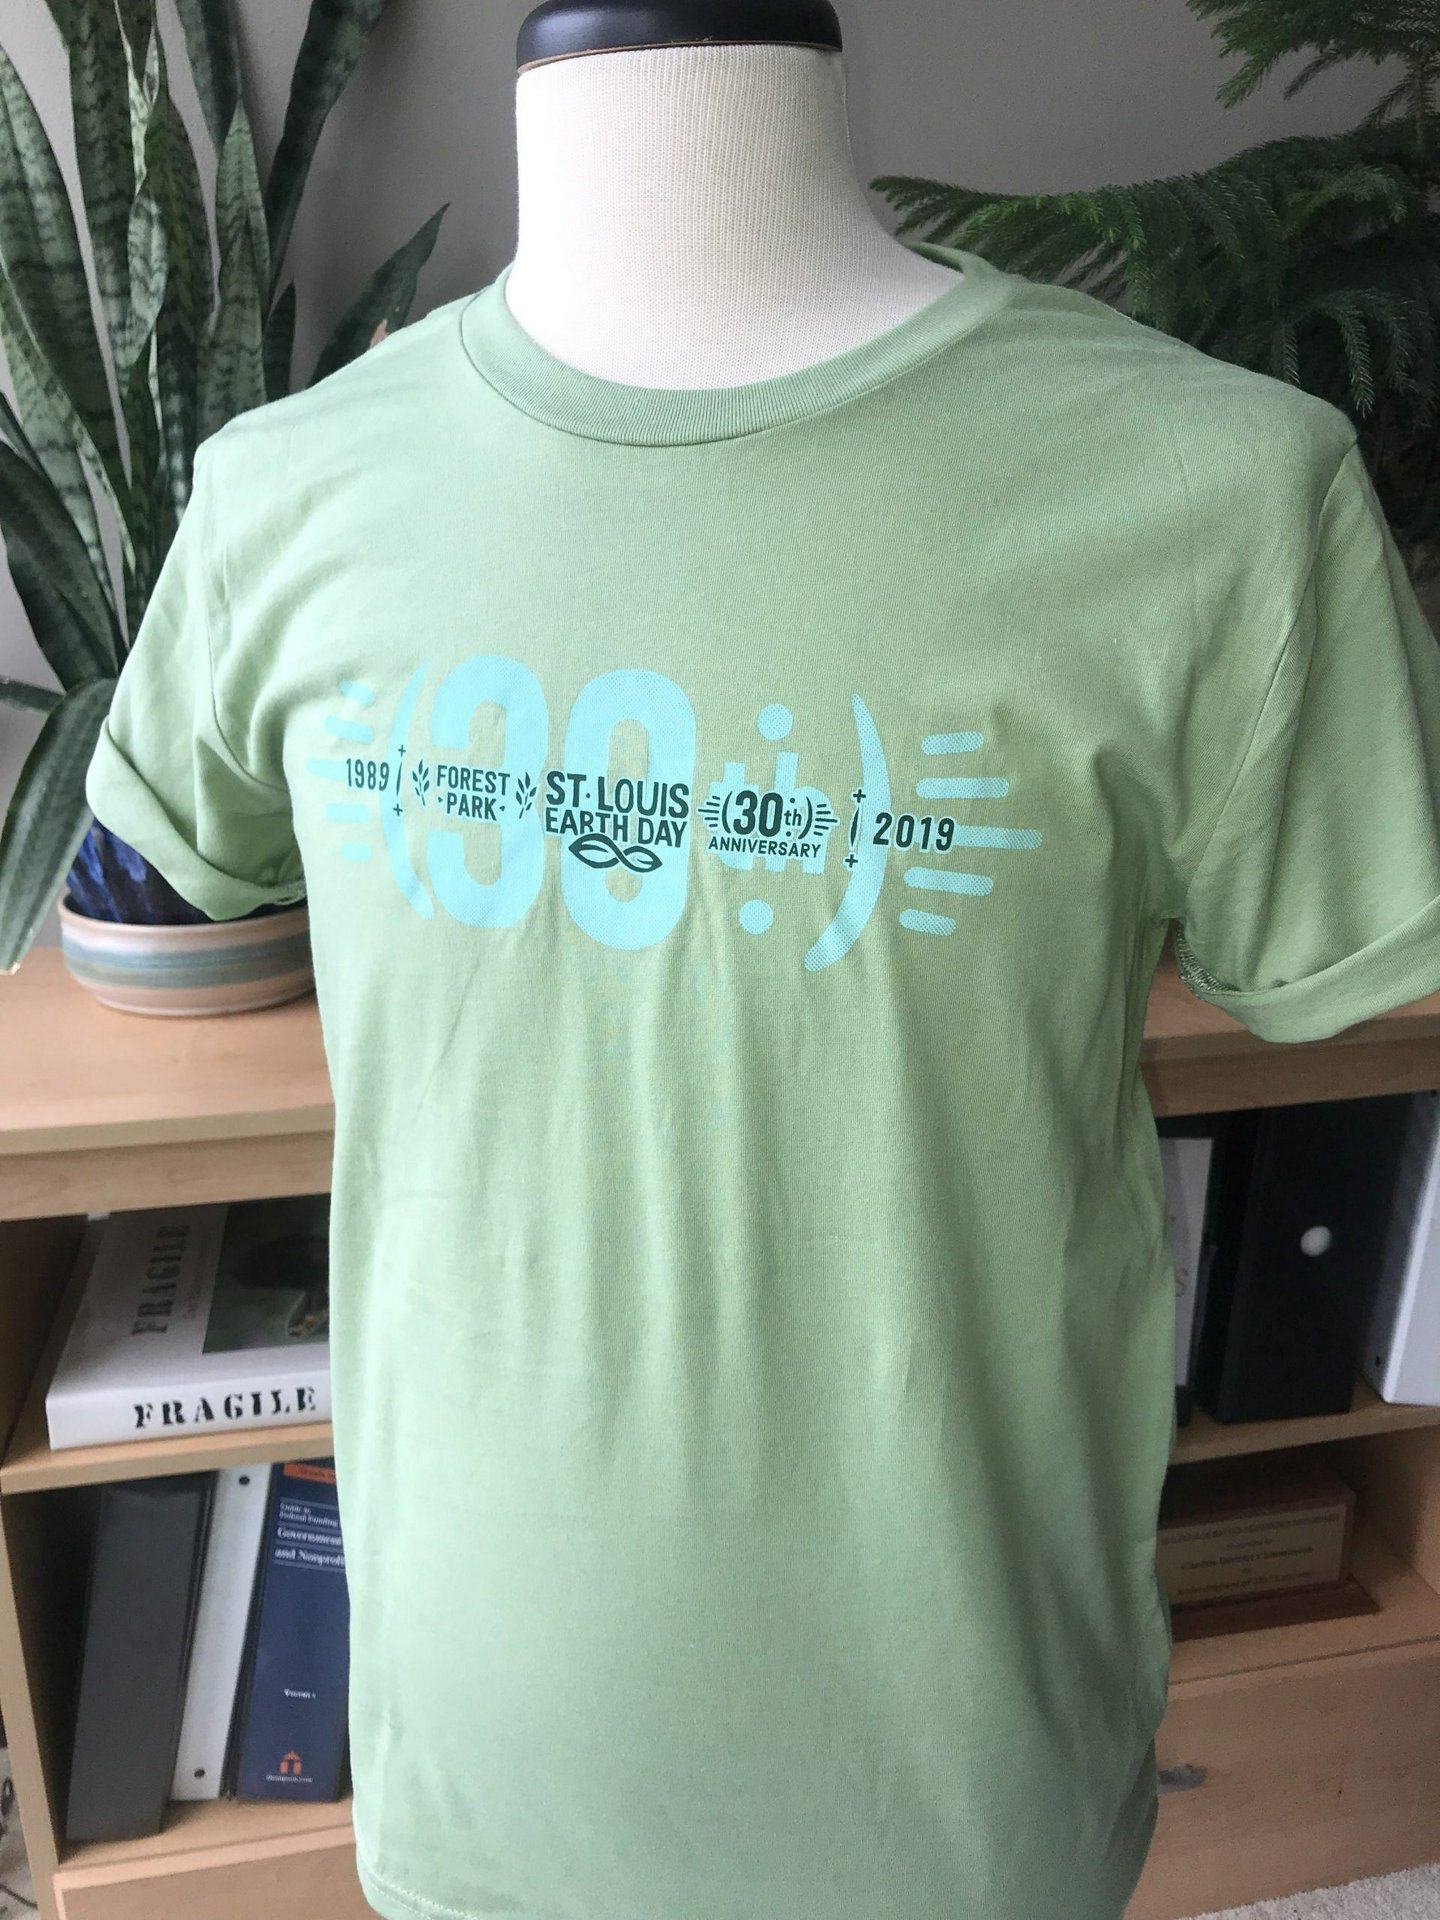 hovedvej Electrify fængsel 2019 St. Louis Earth Day Festival T-Shirt | earthday365